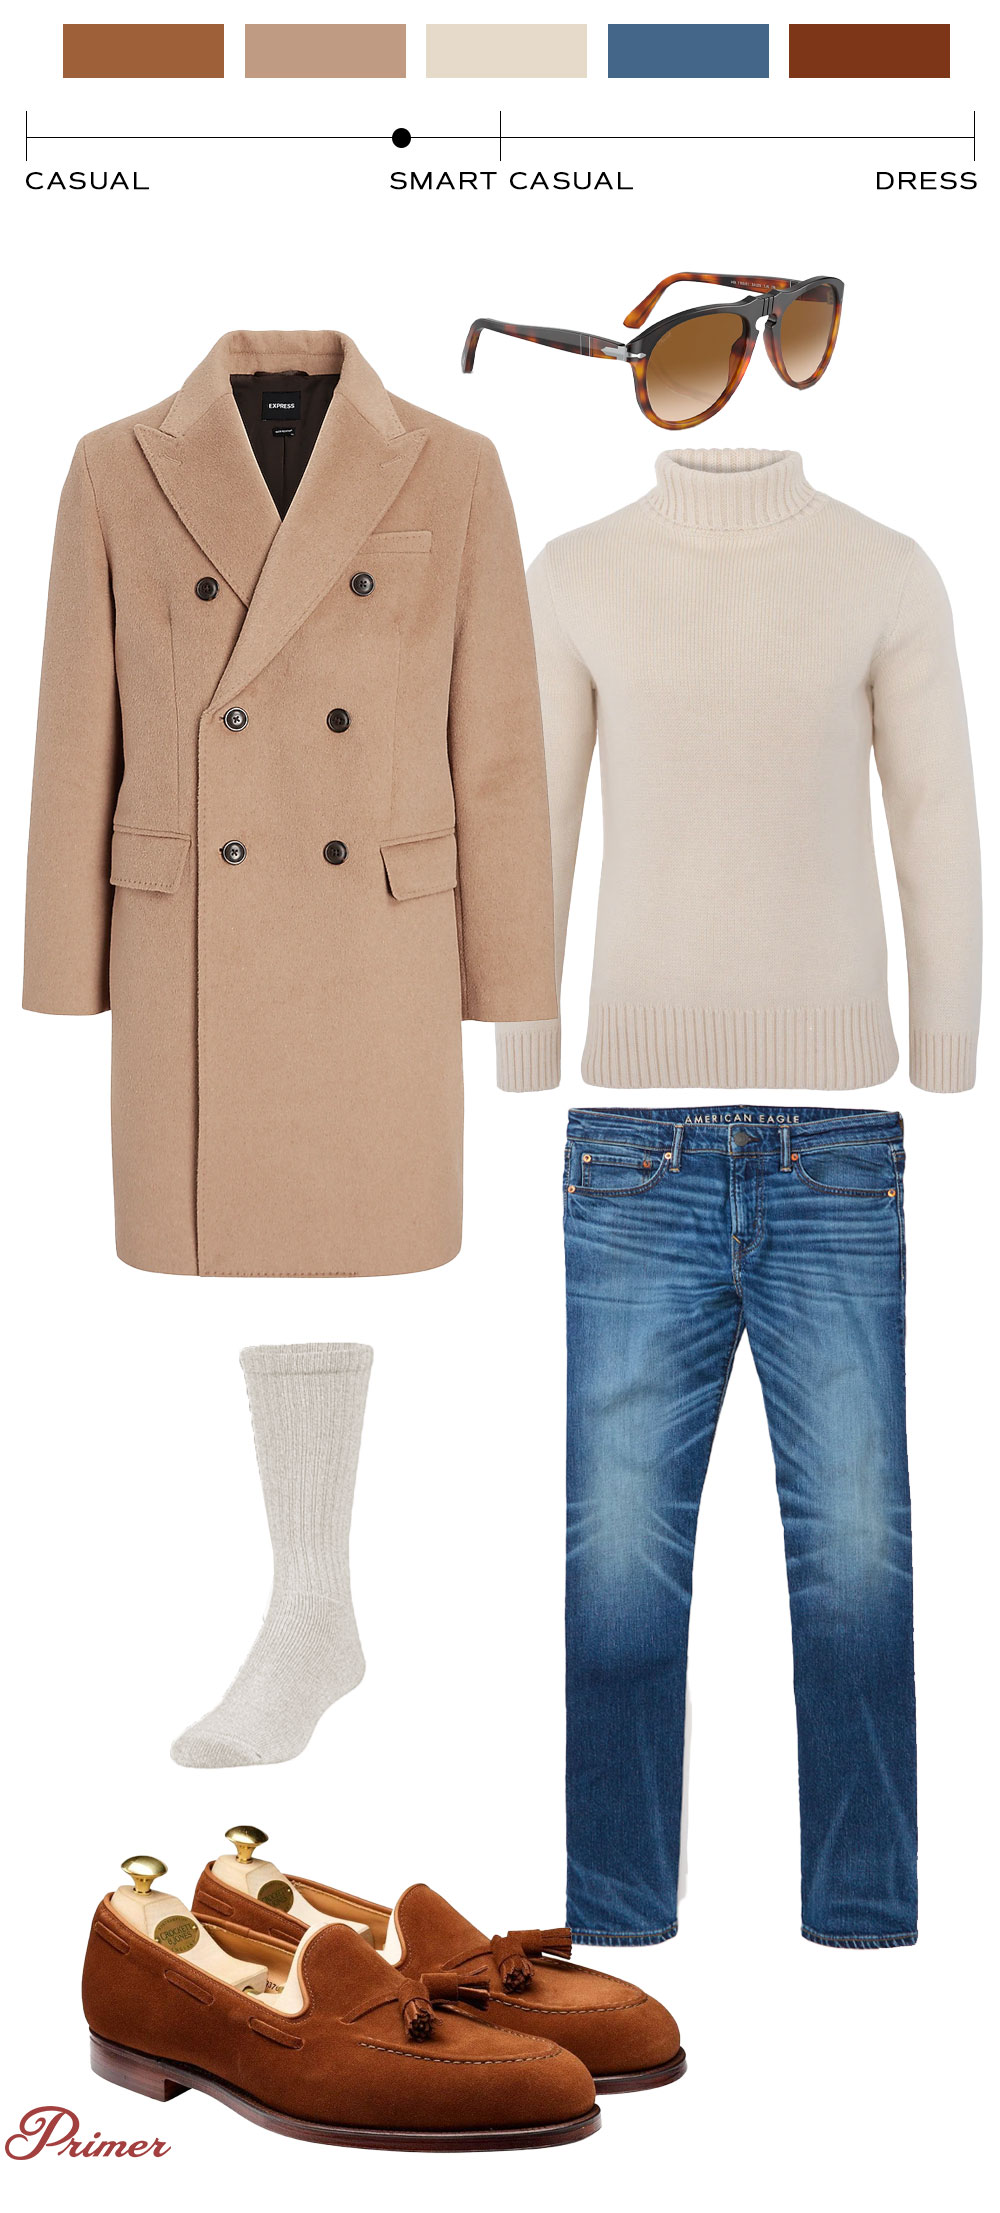 a smart casual winter outfit made of neutral hues featuring a camel color over coat, an off white roll neck sweater, light wash jeans, beige socks, and tan suede loafers